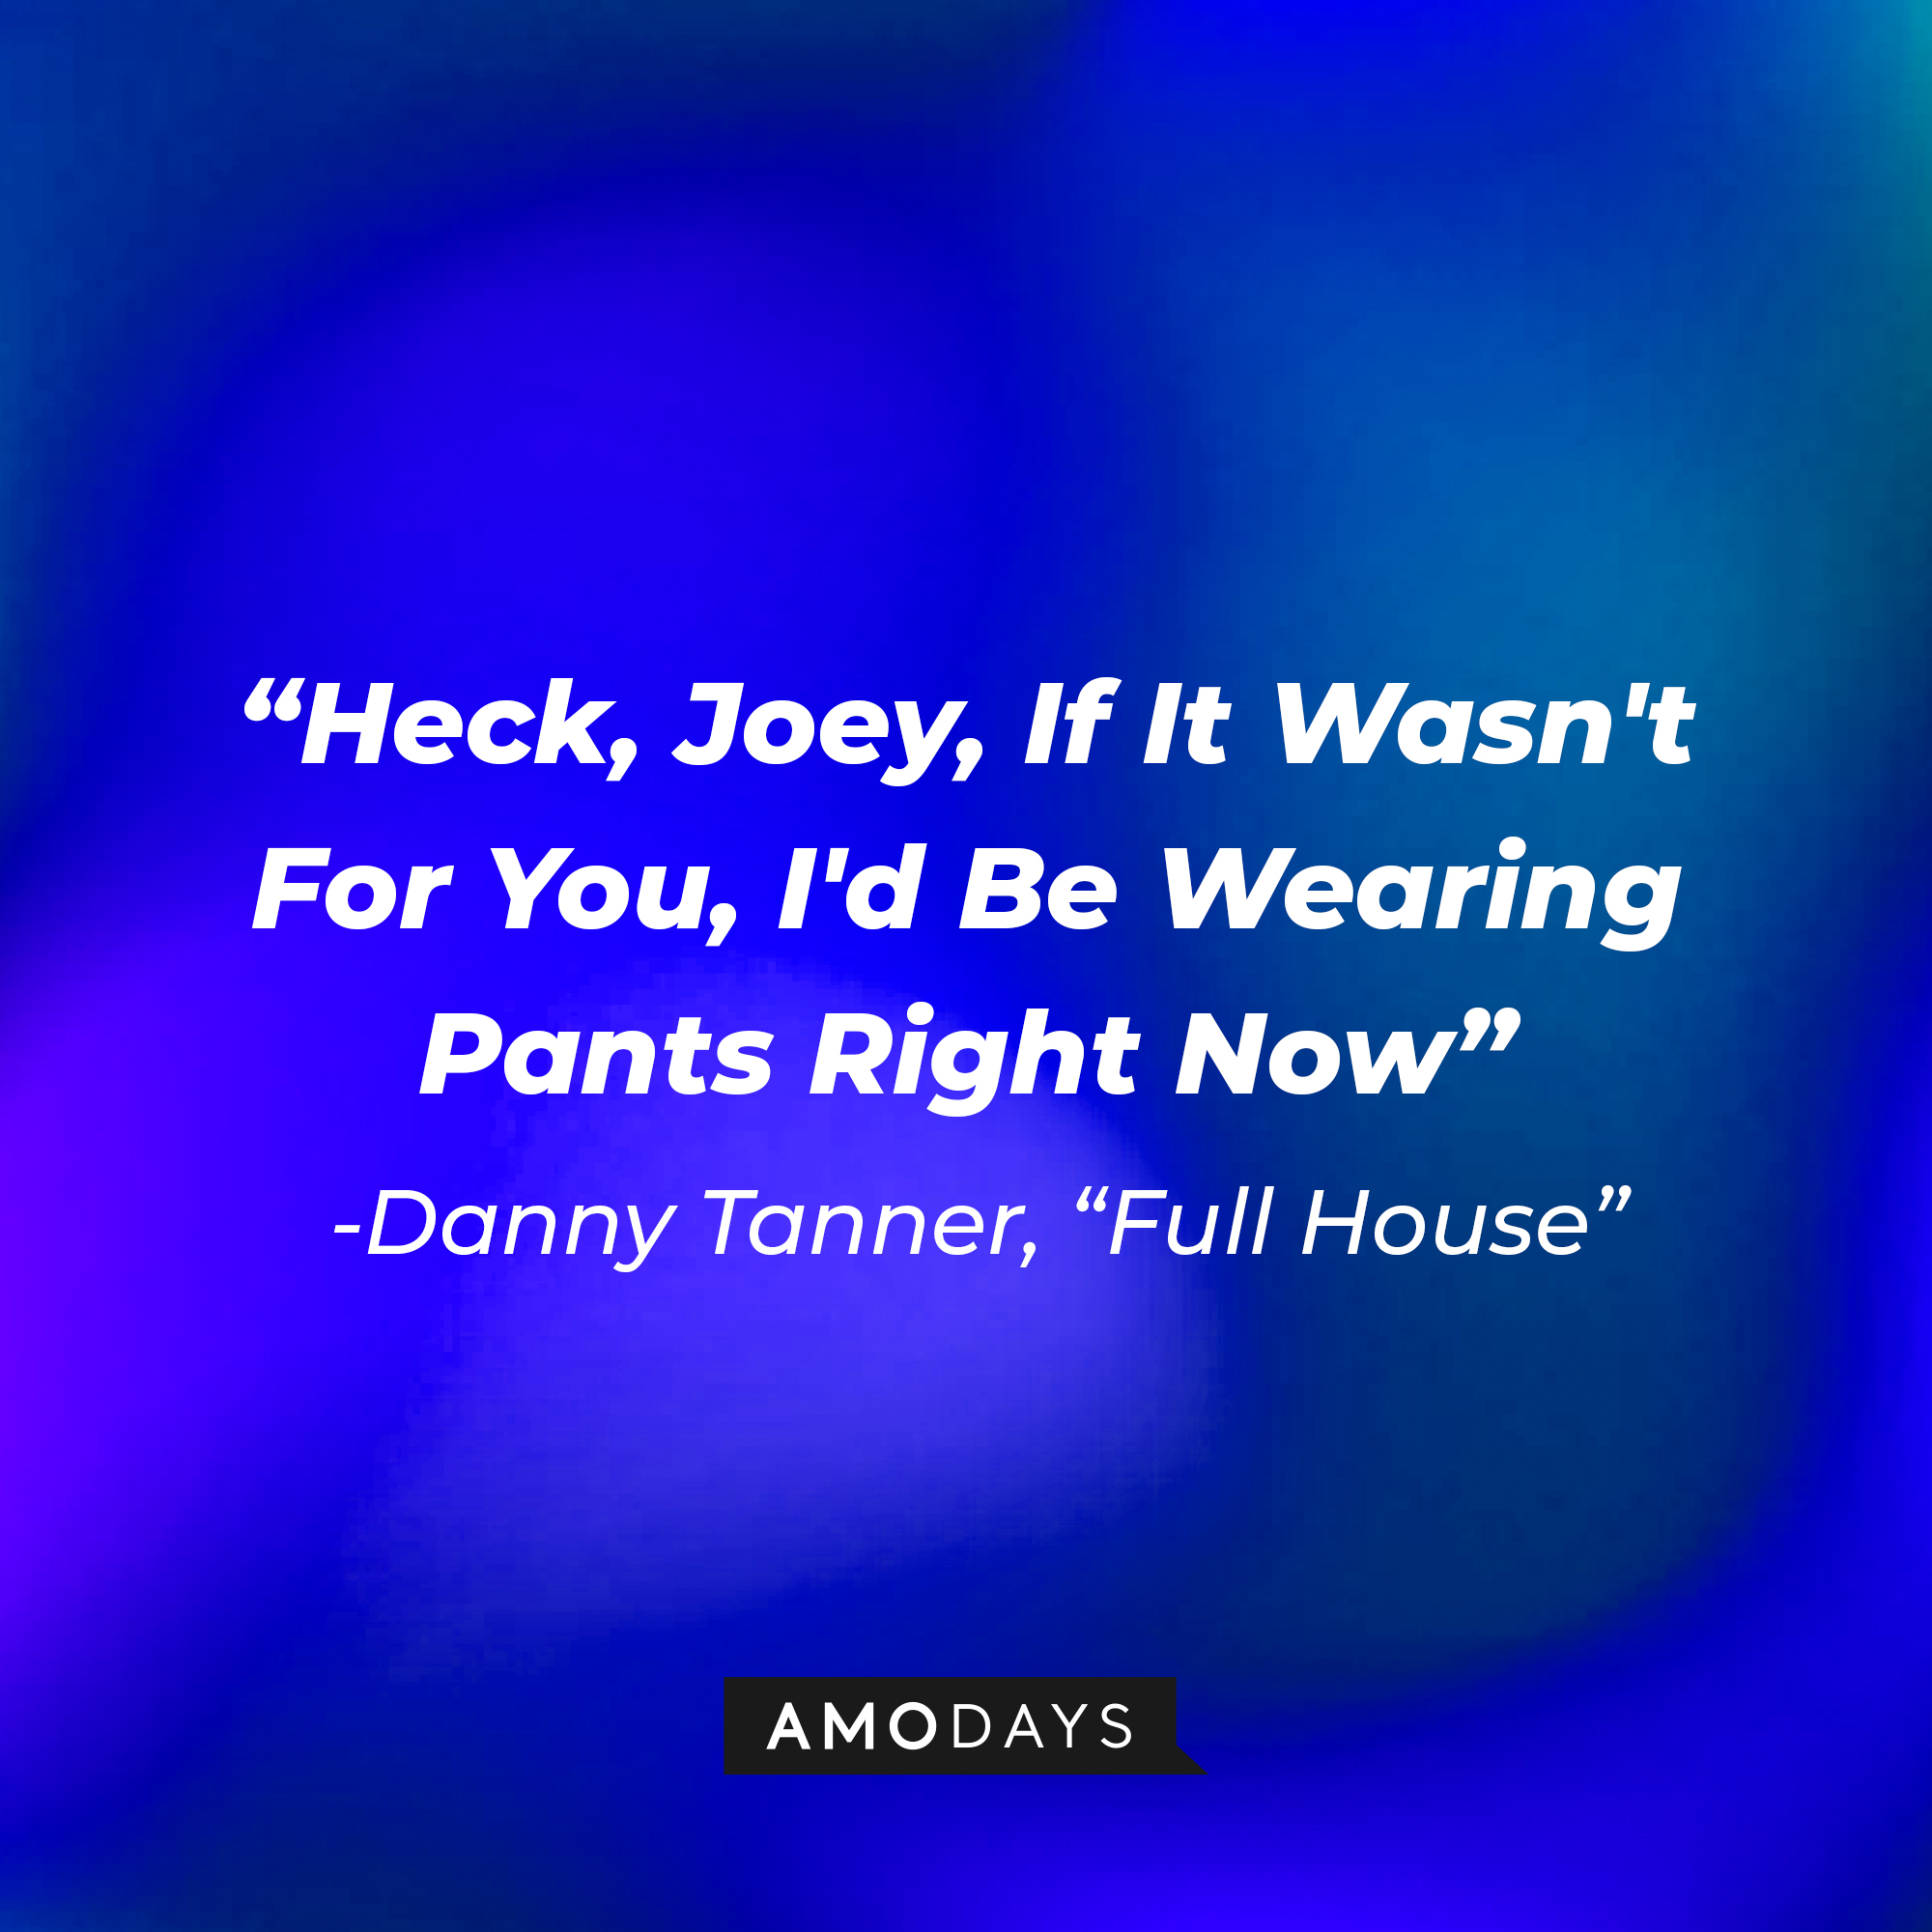 Danny Tanner's quote from "Full House" : "Heck, Joey, If It Wasn't For You, I'd Be Wearing Pants Right Now" | Source: facebook.com/FullHouseTVshow